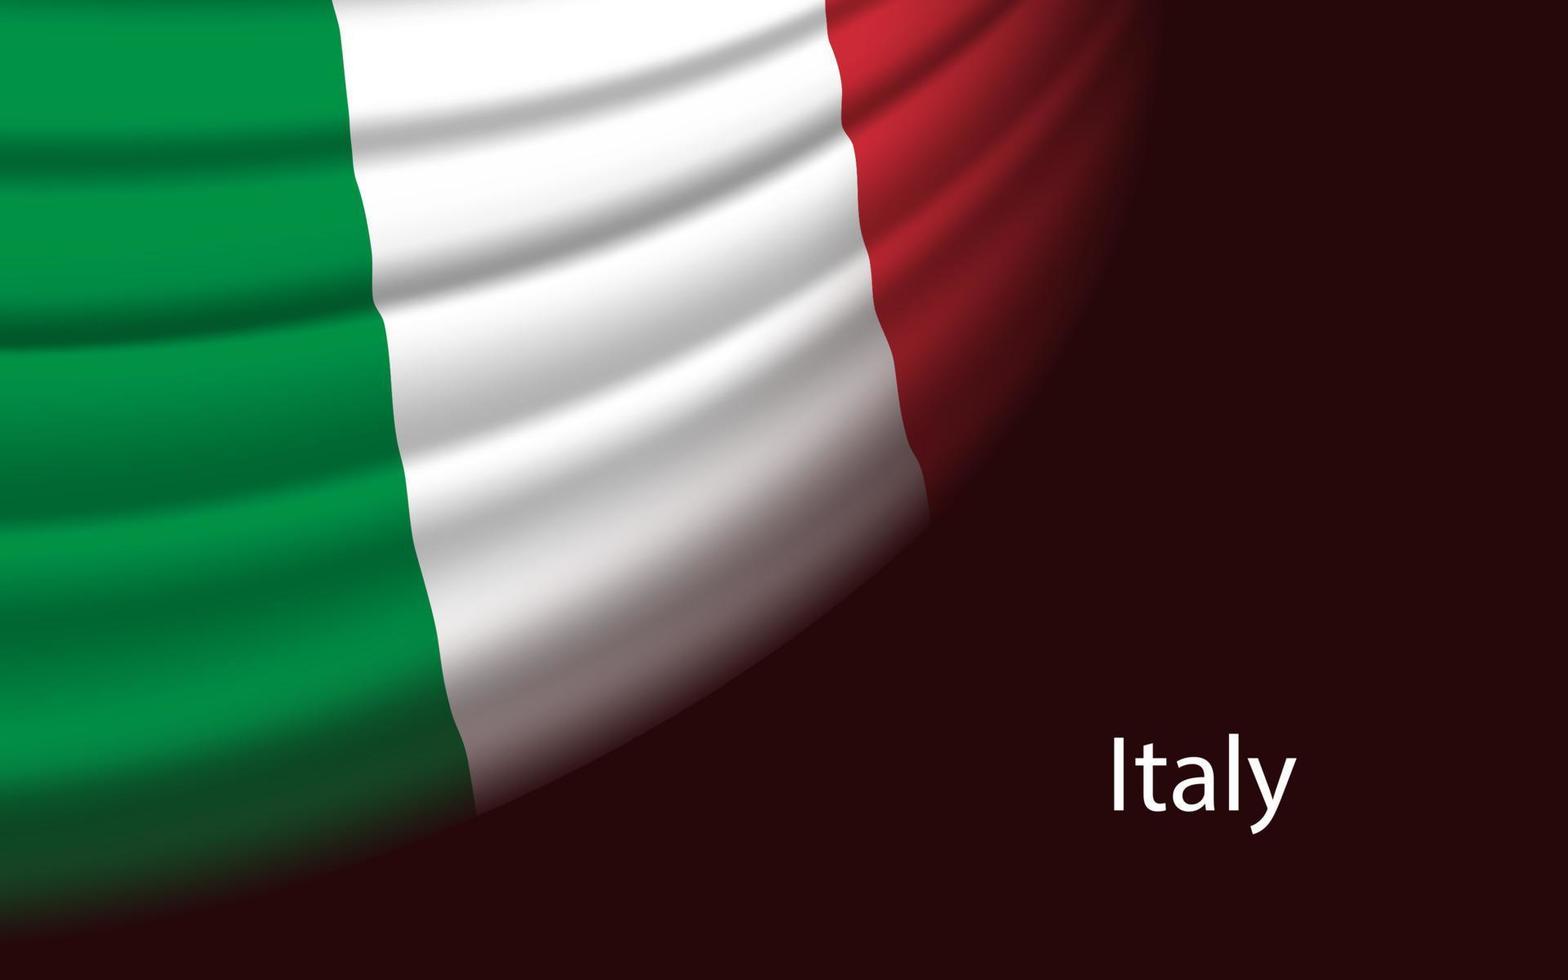 Wave flag of Italy on dark background. Banner or ribbon vector t